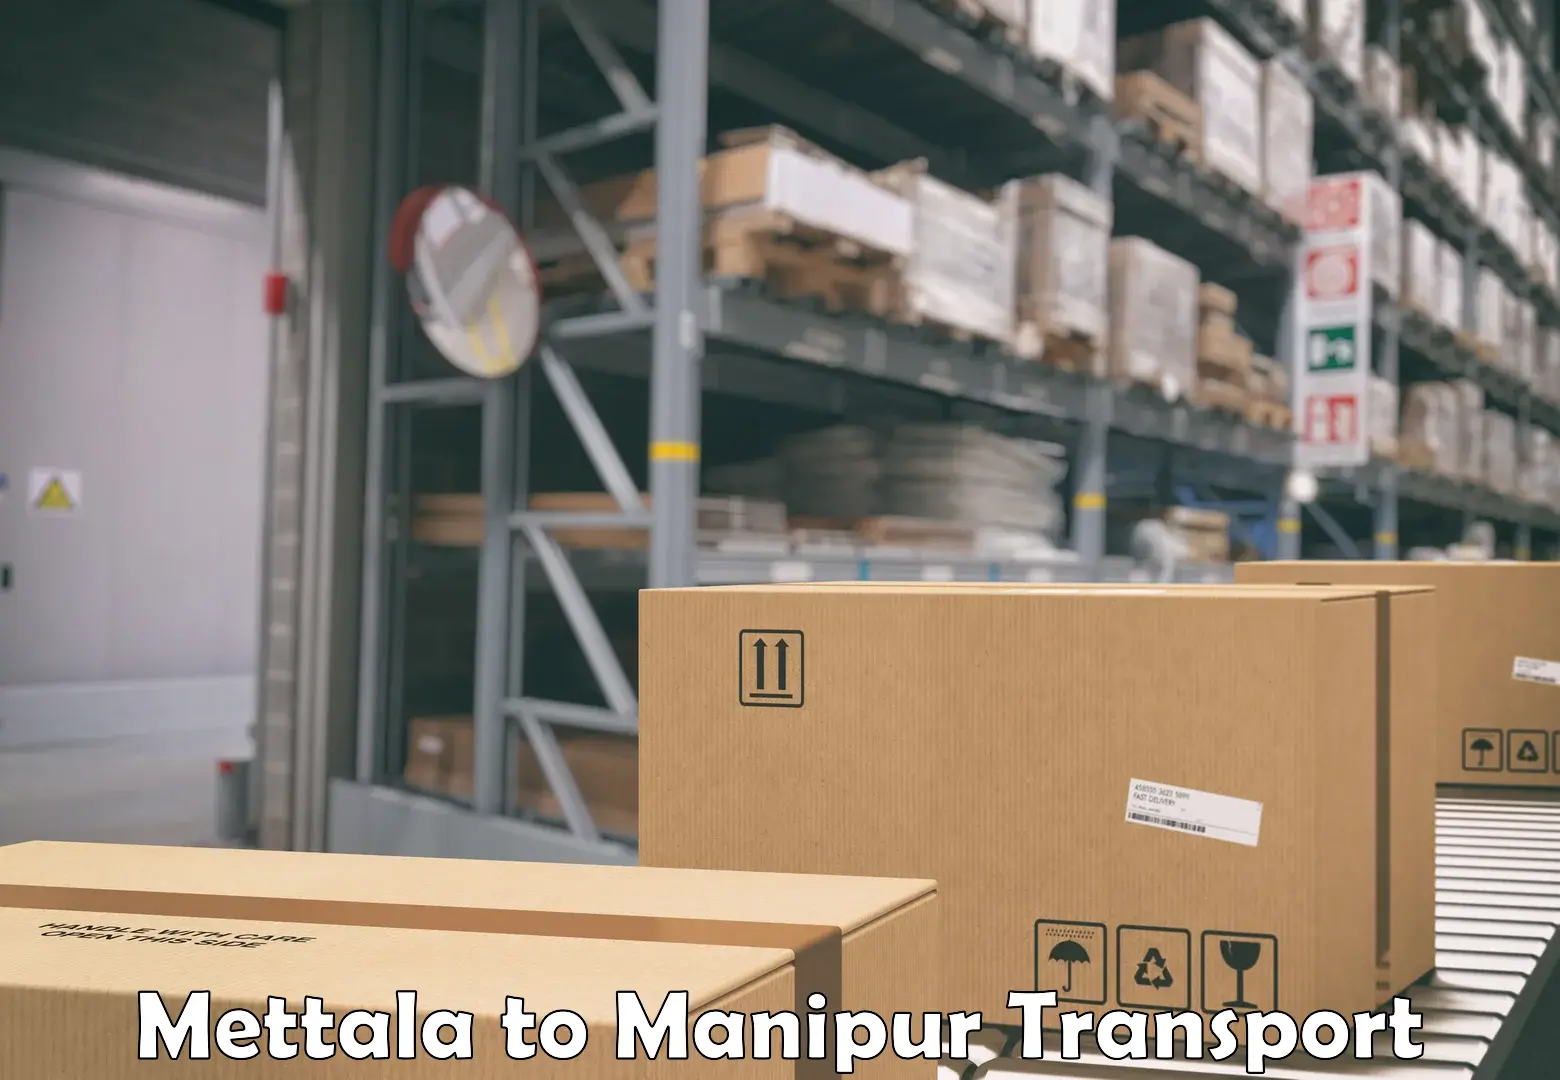 Daily parcel service transport Mettala to Manipur